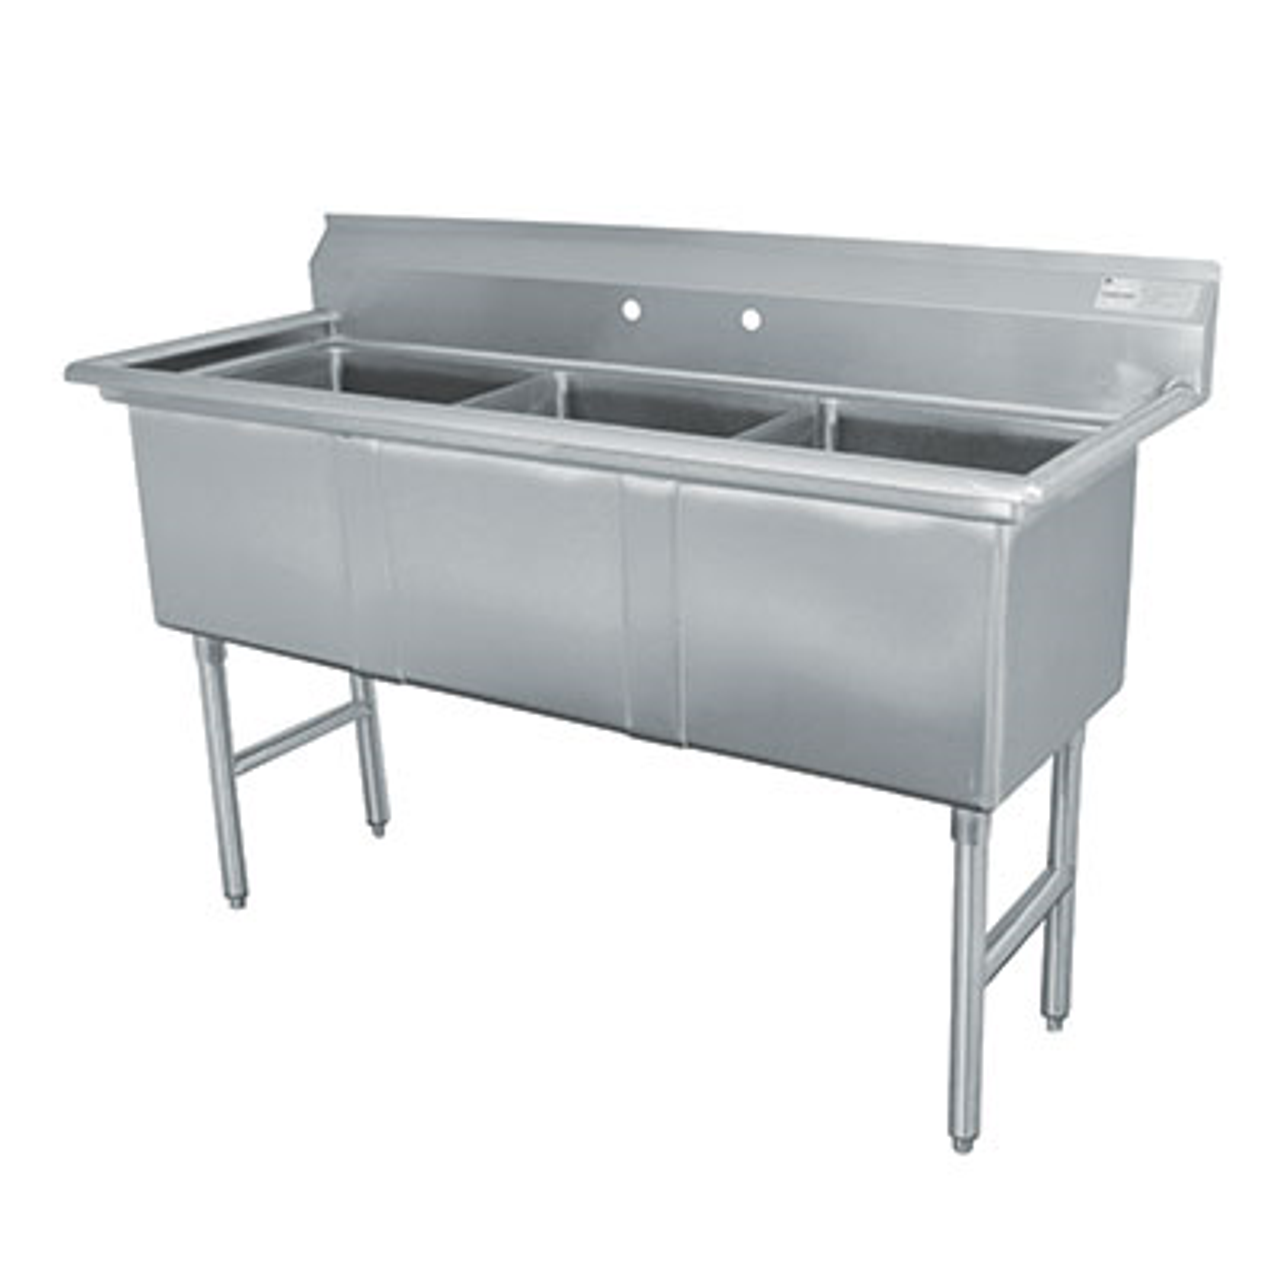 Fabricated Sink, 3-compartment, no drainboard, bowl size 18" x 18" x 14" deep, 16 gauge 304 stainless steel, tile edge splash, rolled edge, 8" OC faucet holes, stainless steel legs with adjustable side cross-bracing, 1" adjustable stainless steel bullet feet, overall 24" F/B x 59" L/R, NSF